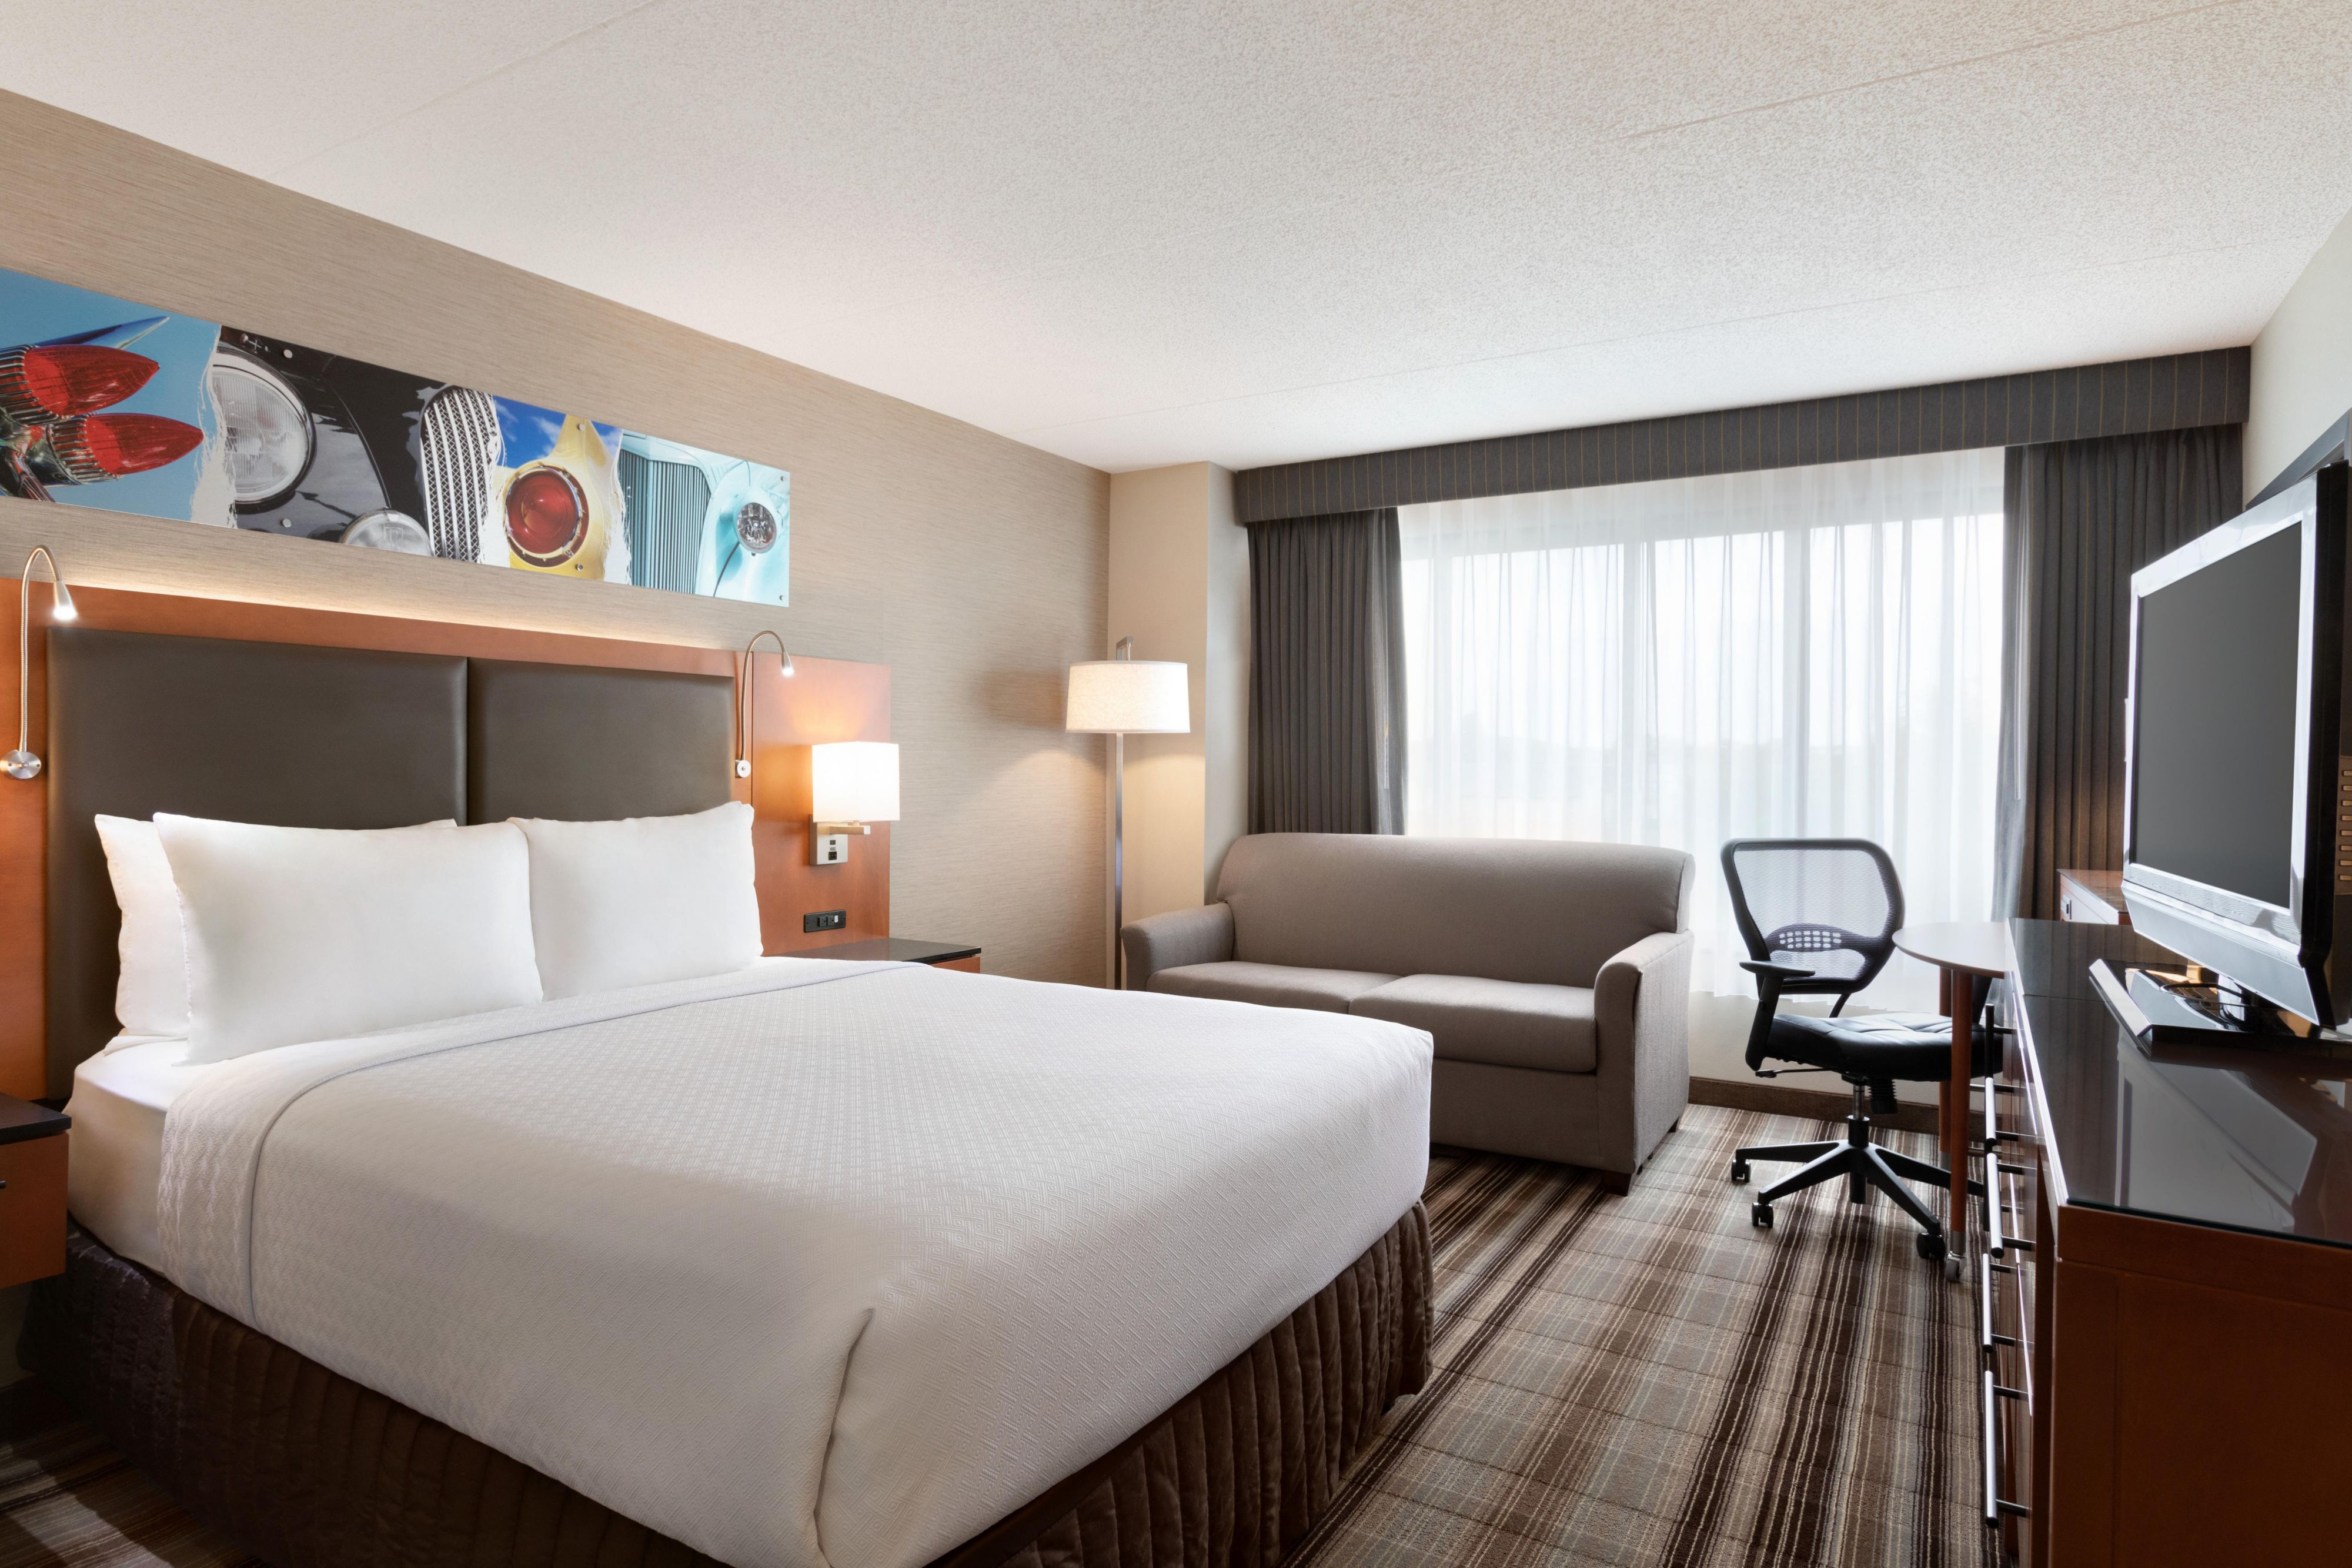 Enjoy comfort, space and style in our standard queen guest room.